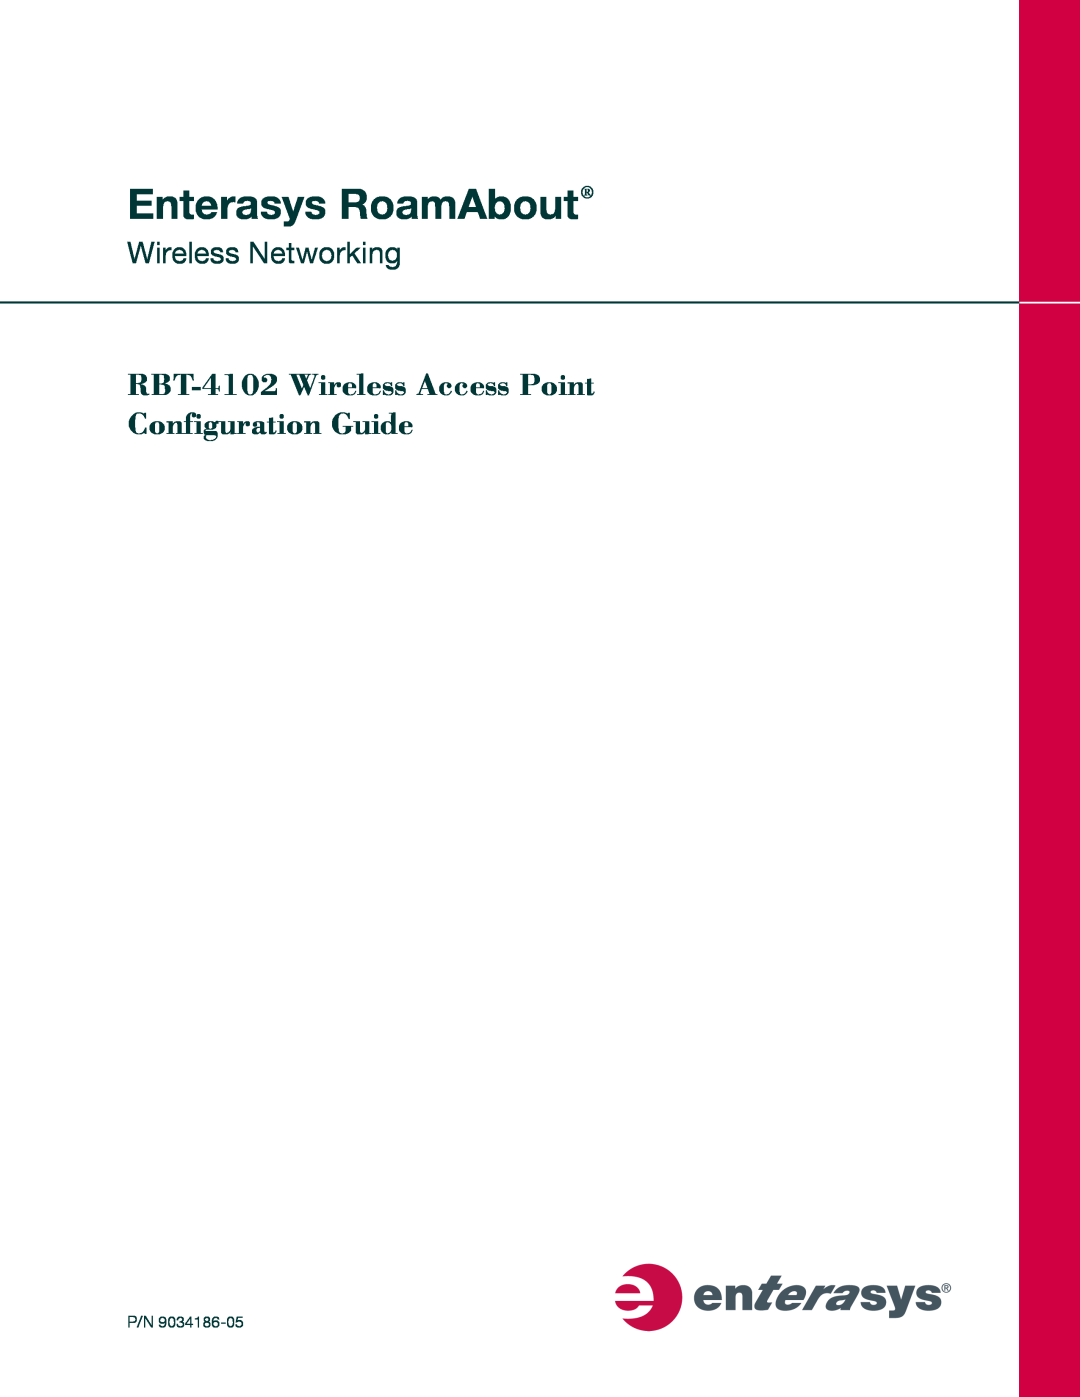 Enterasys Networks manual Enterasys RoamAbout, RBT-4102 Wireless Access Point Configuration Guide, Wireless Networking 